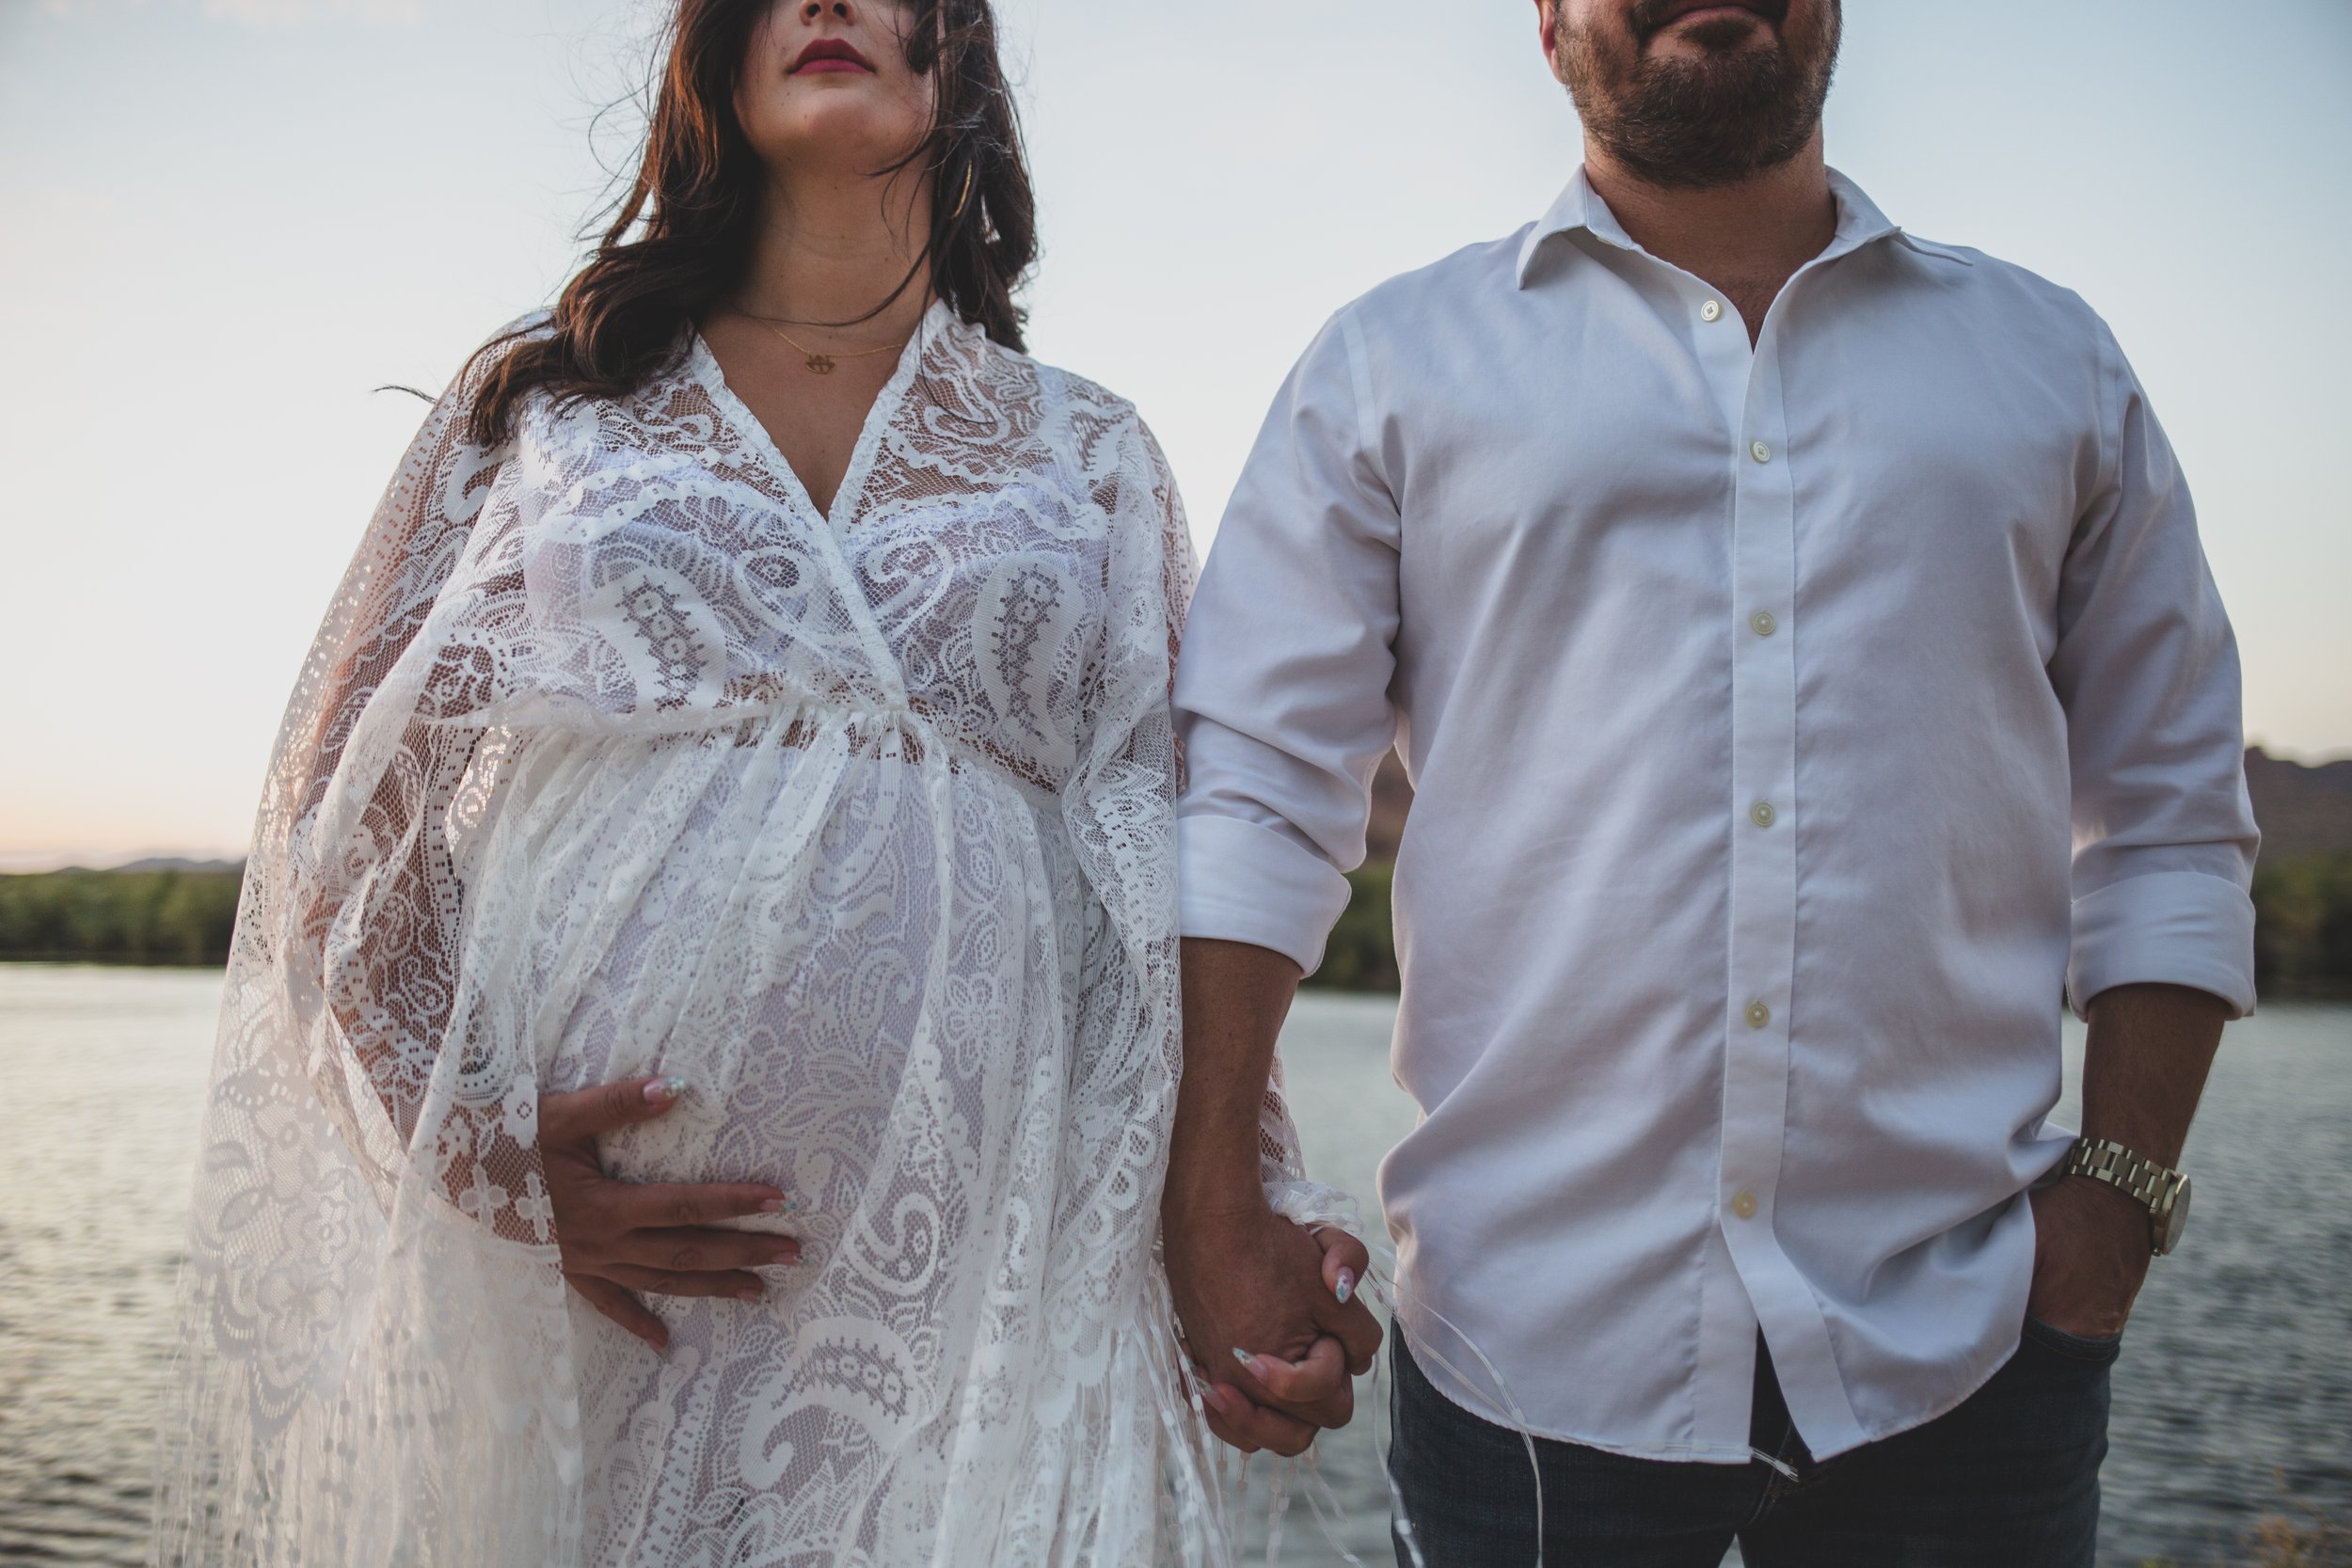 Romantic couple poses with the wind in their hair for maternity photos near the water at sunset the Salt River by timeless Phoenix maternity photographer; Jennifer Lind Schutsky.